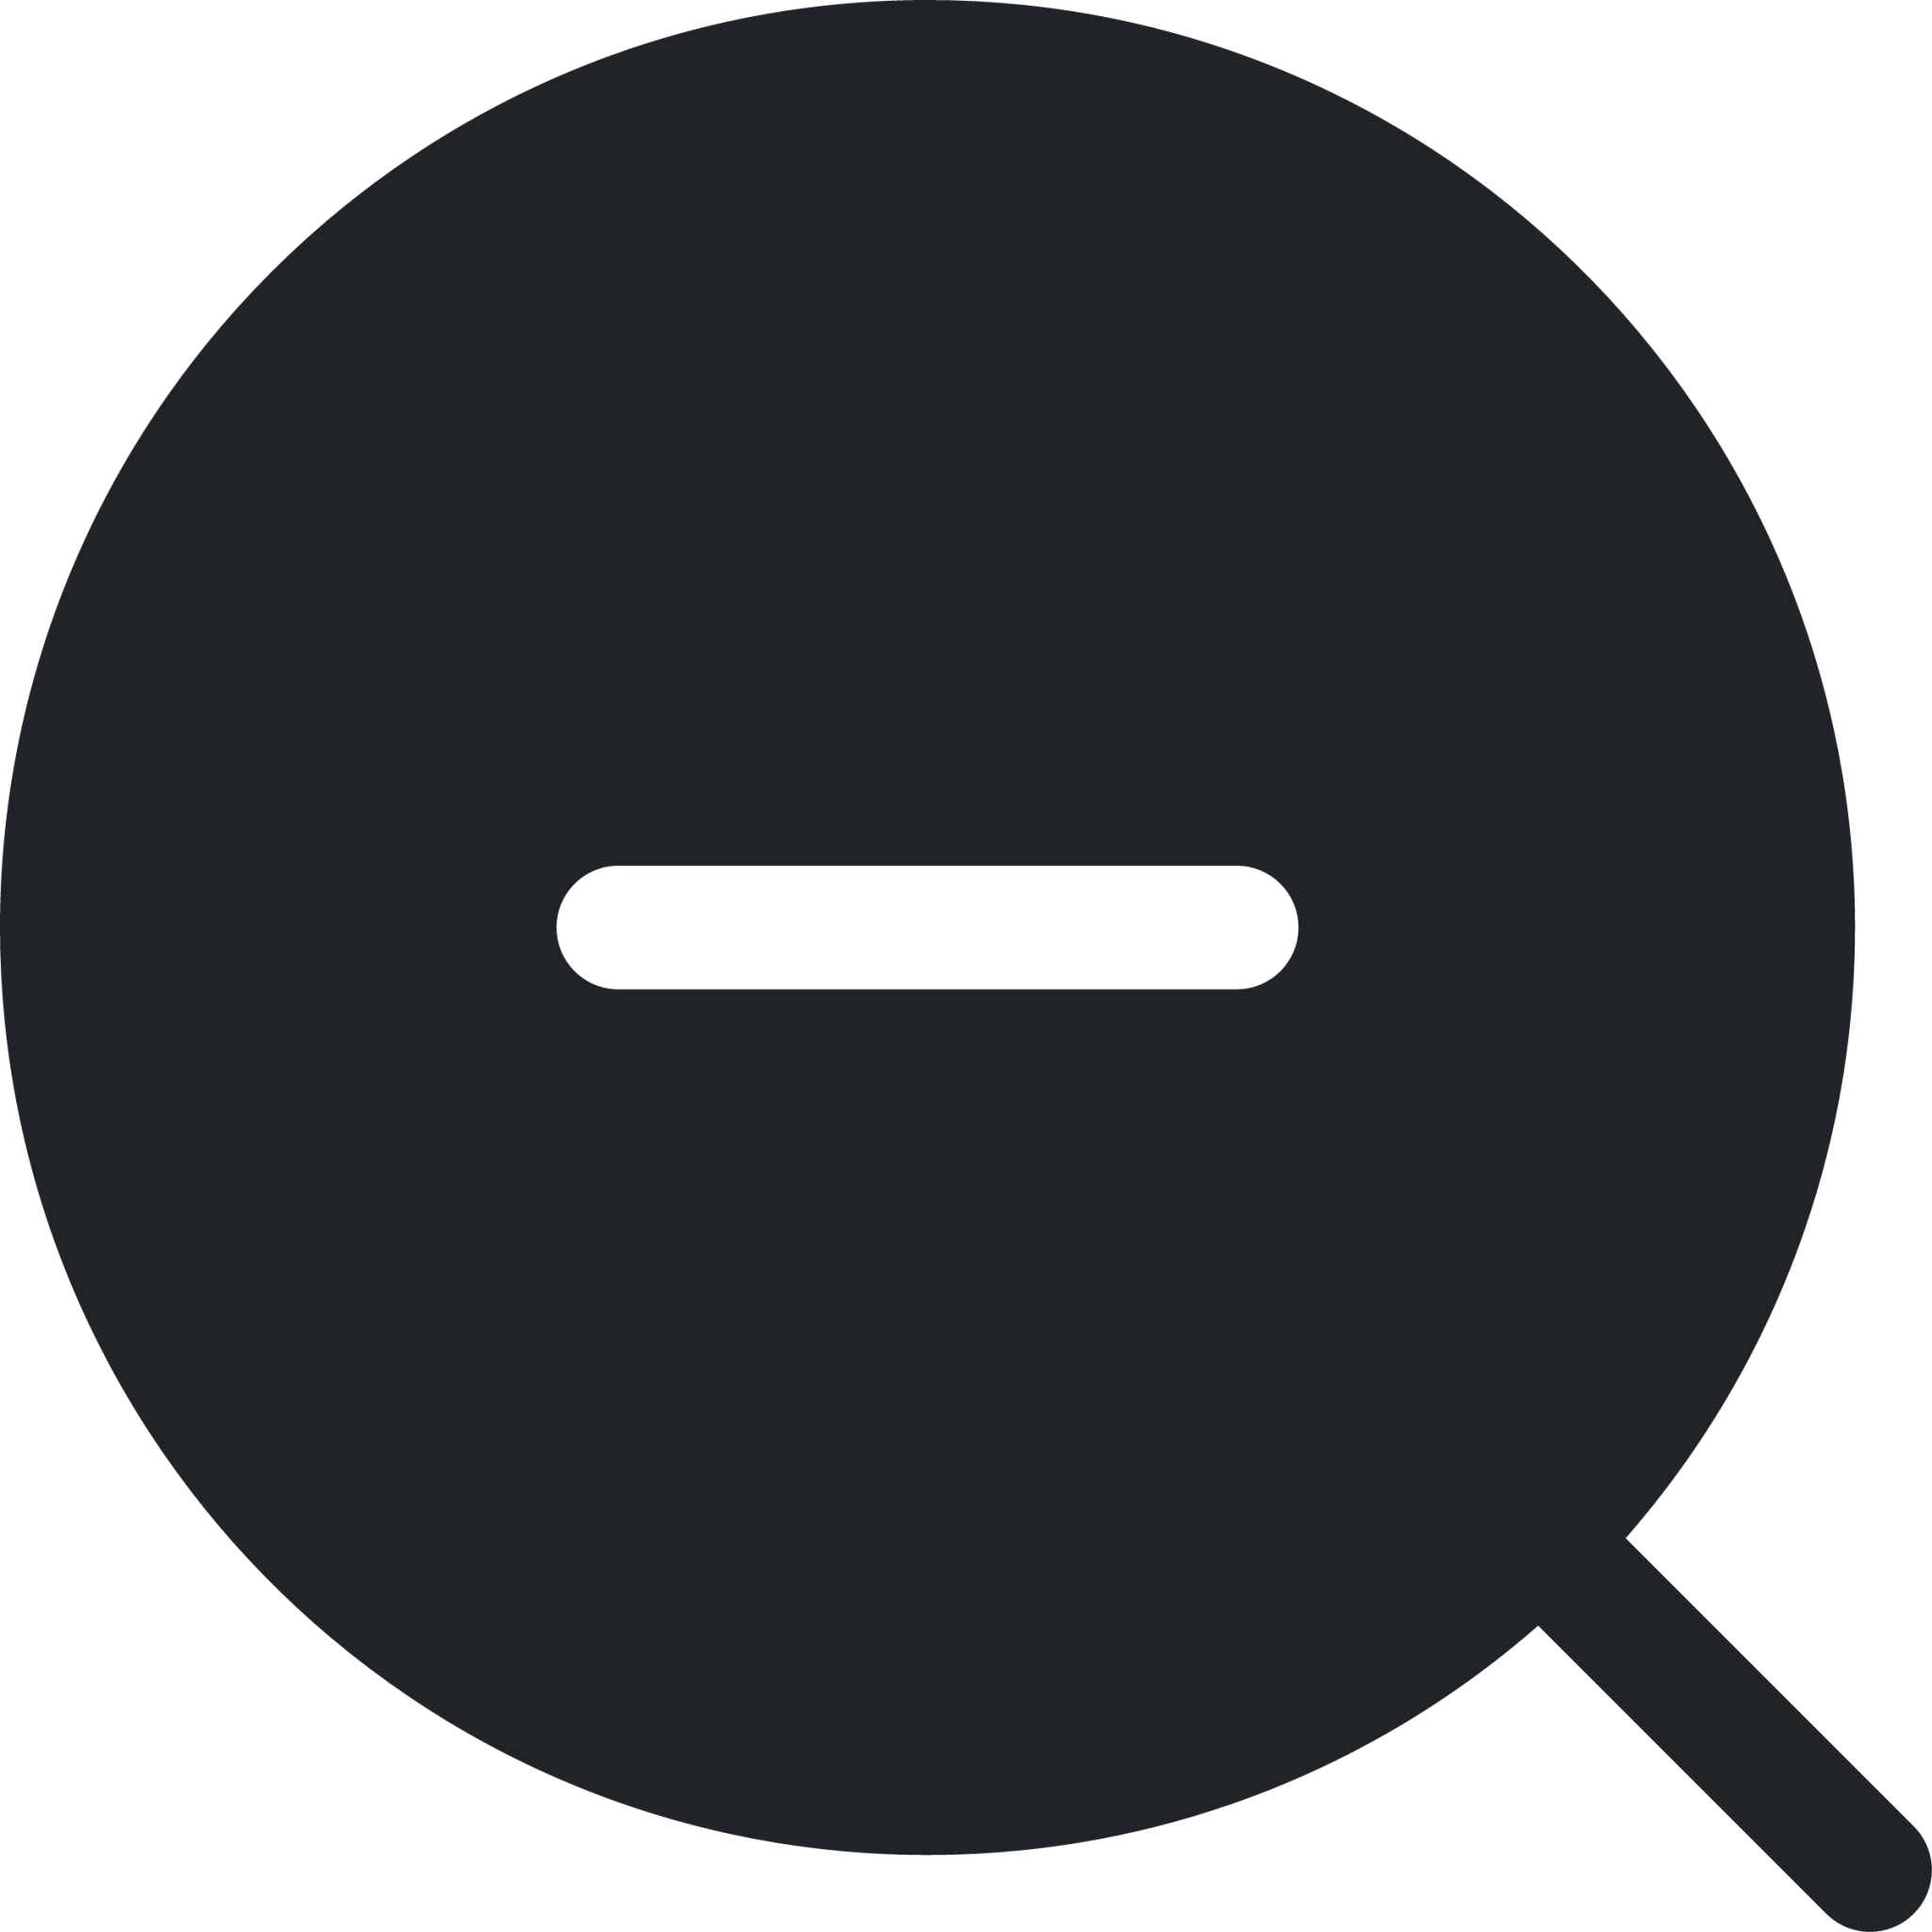 magnifier2 (rounded filled) icon